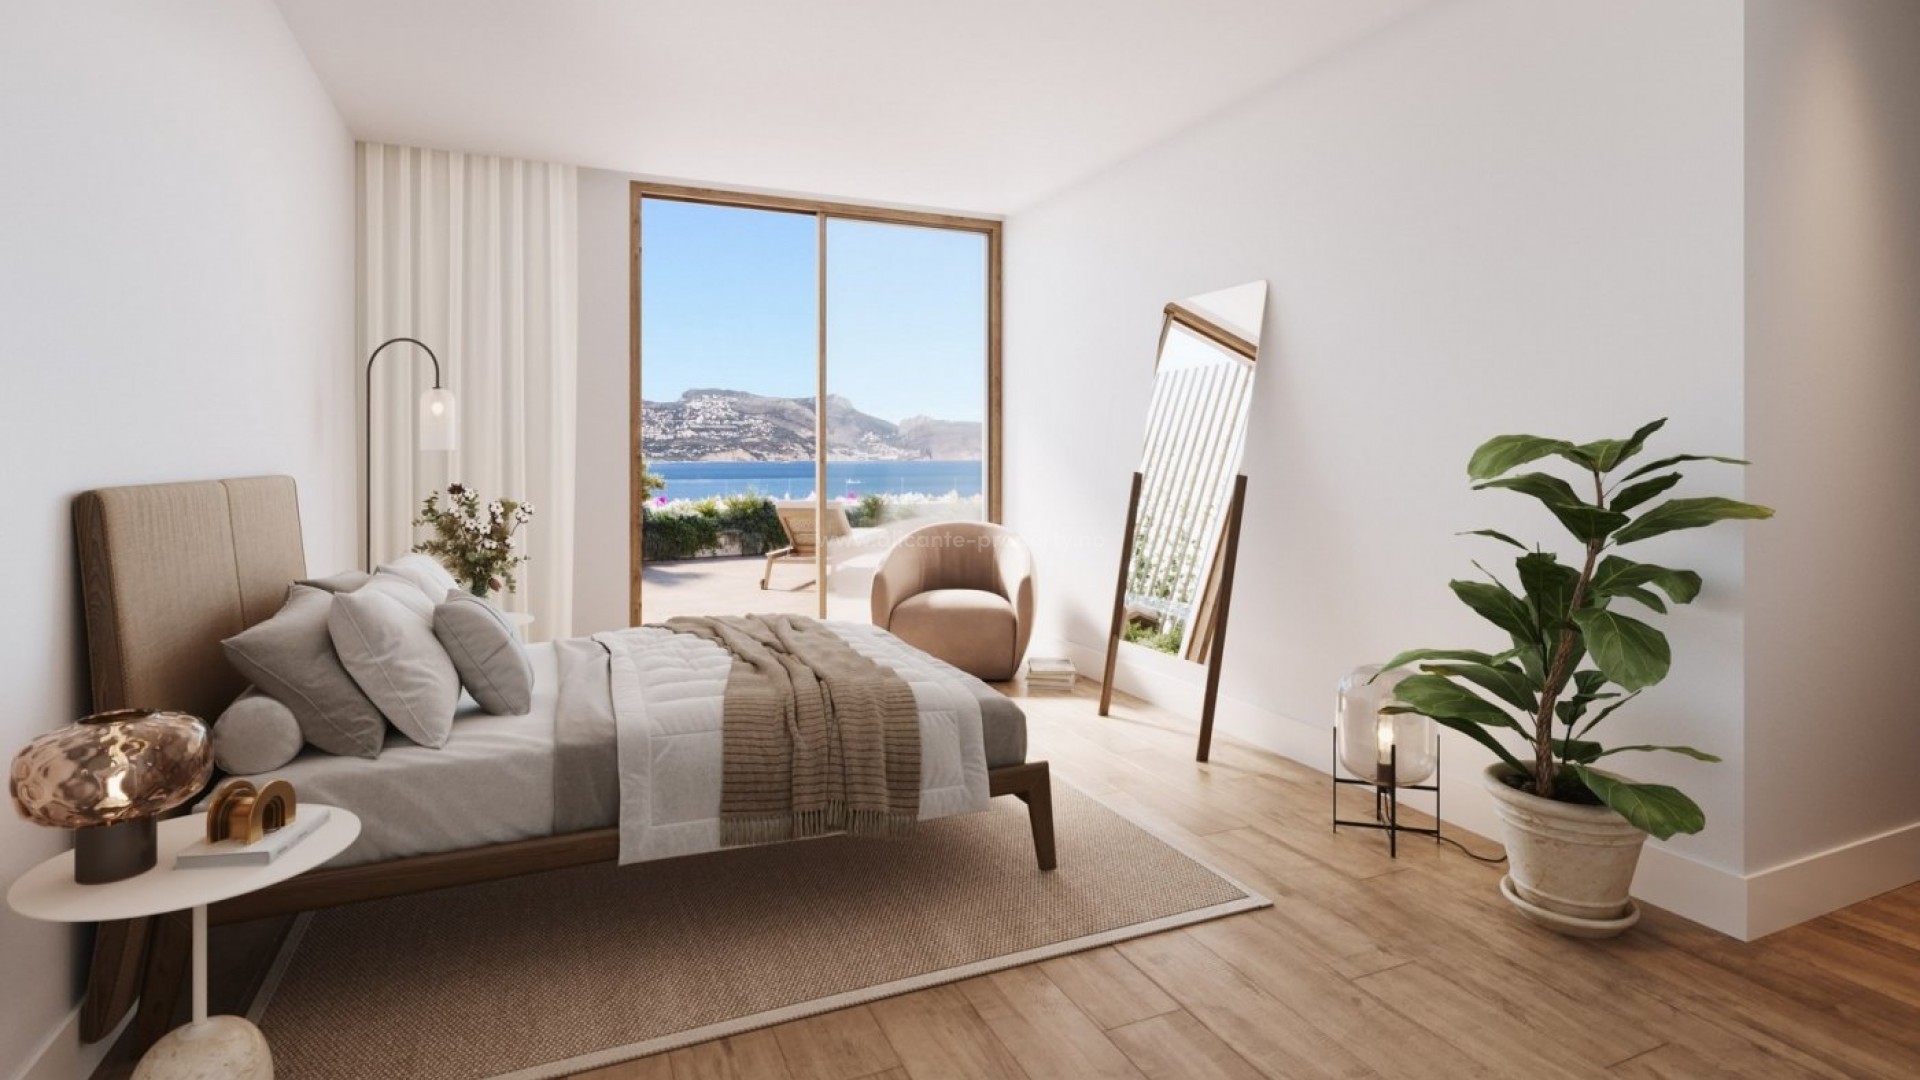 Luxury complex of apartments/penthouses in Albir, 3 bedrooms, 2 bathrooms, some with terrace, private garden or large private solarium, shared pool, just steps from the sea.